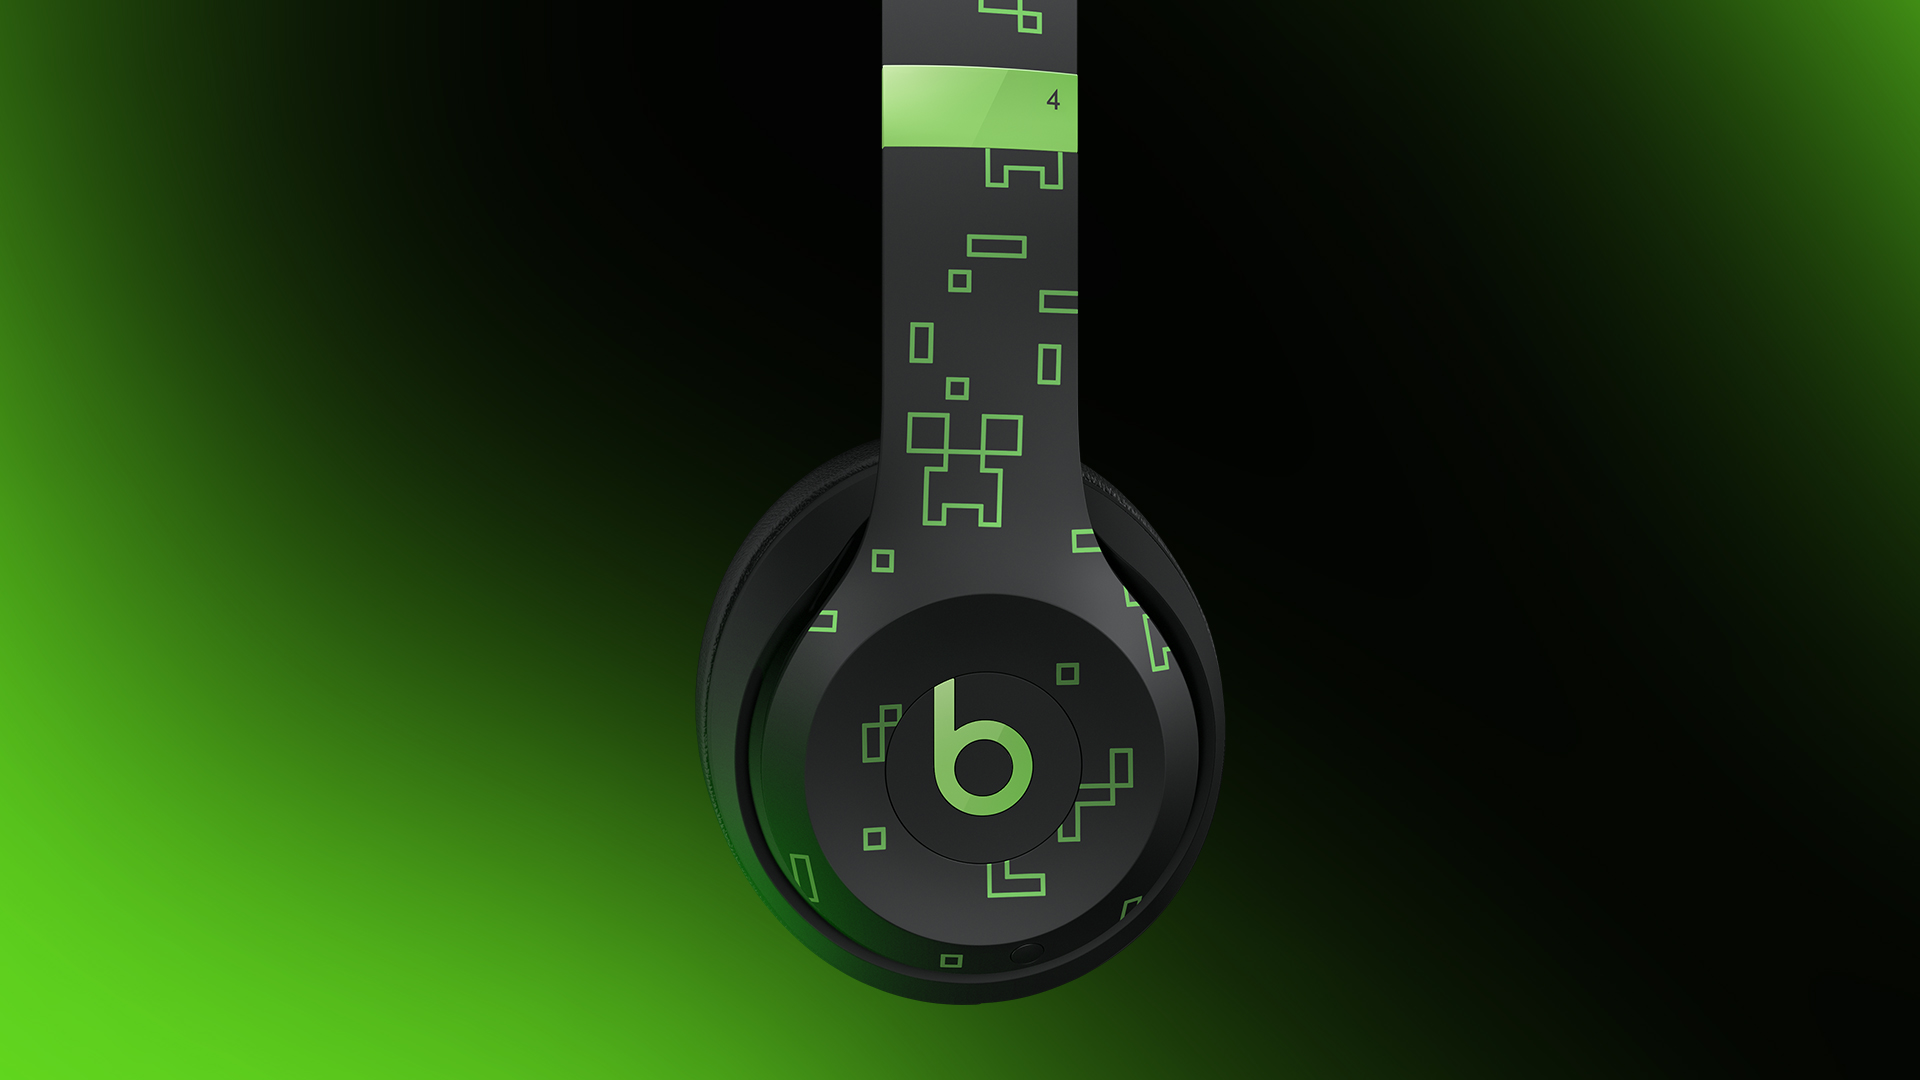 Image of the Beats Solo 4 Minecraft version.